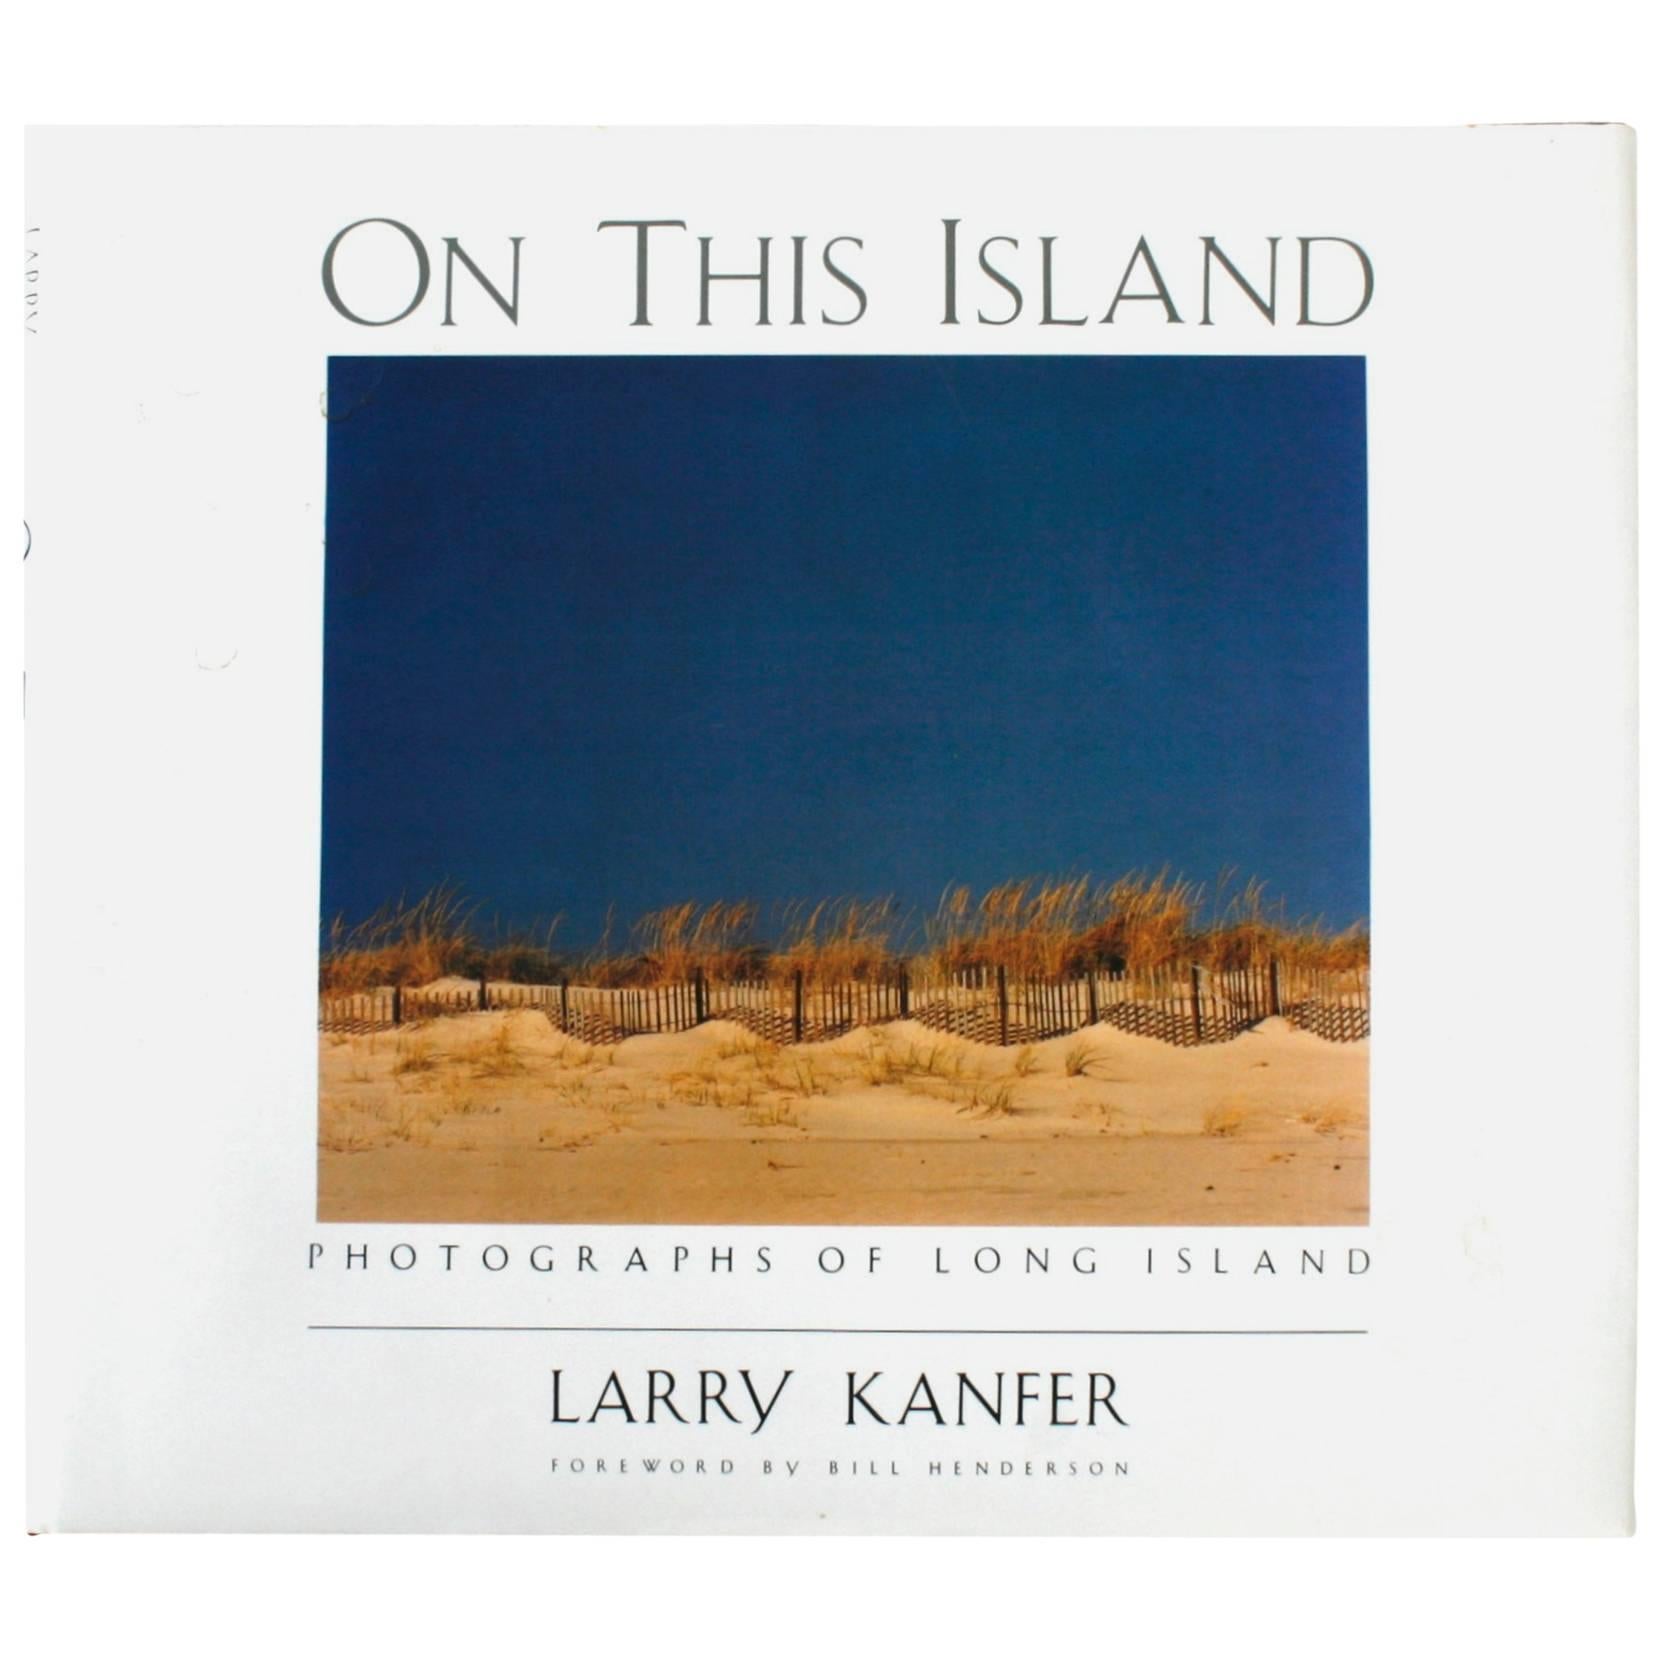 On This Island, Photographs of Long Island, First Edition